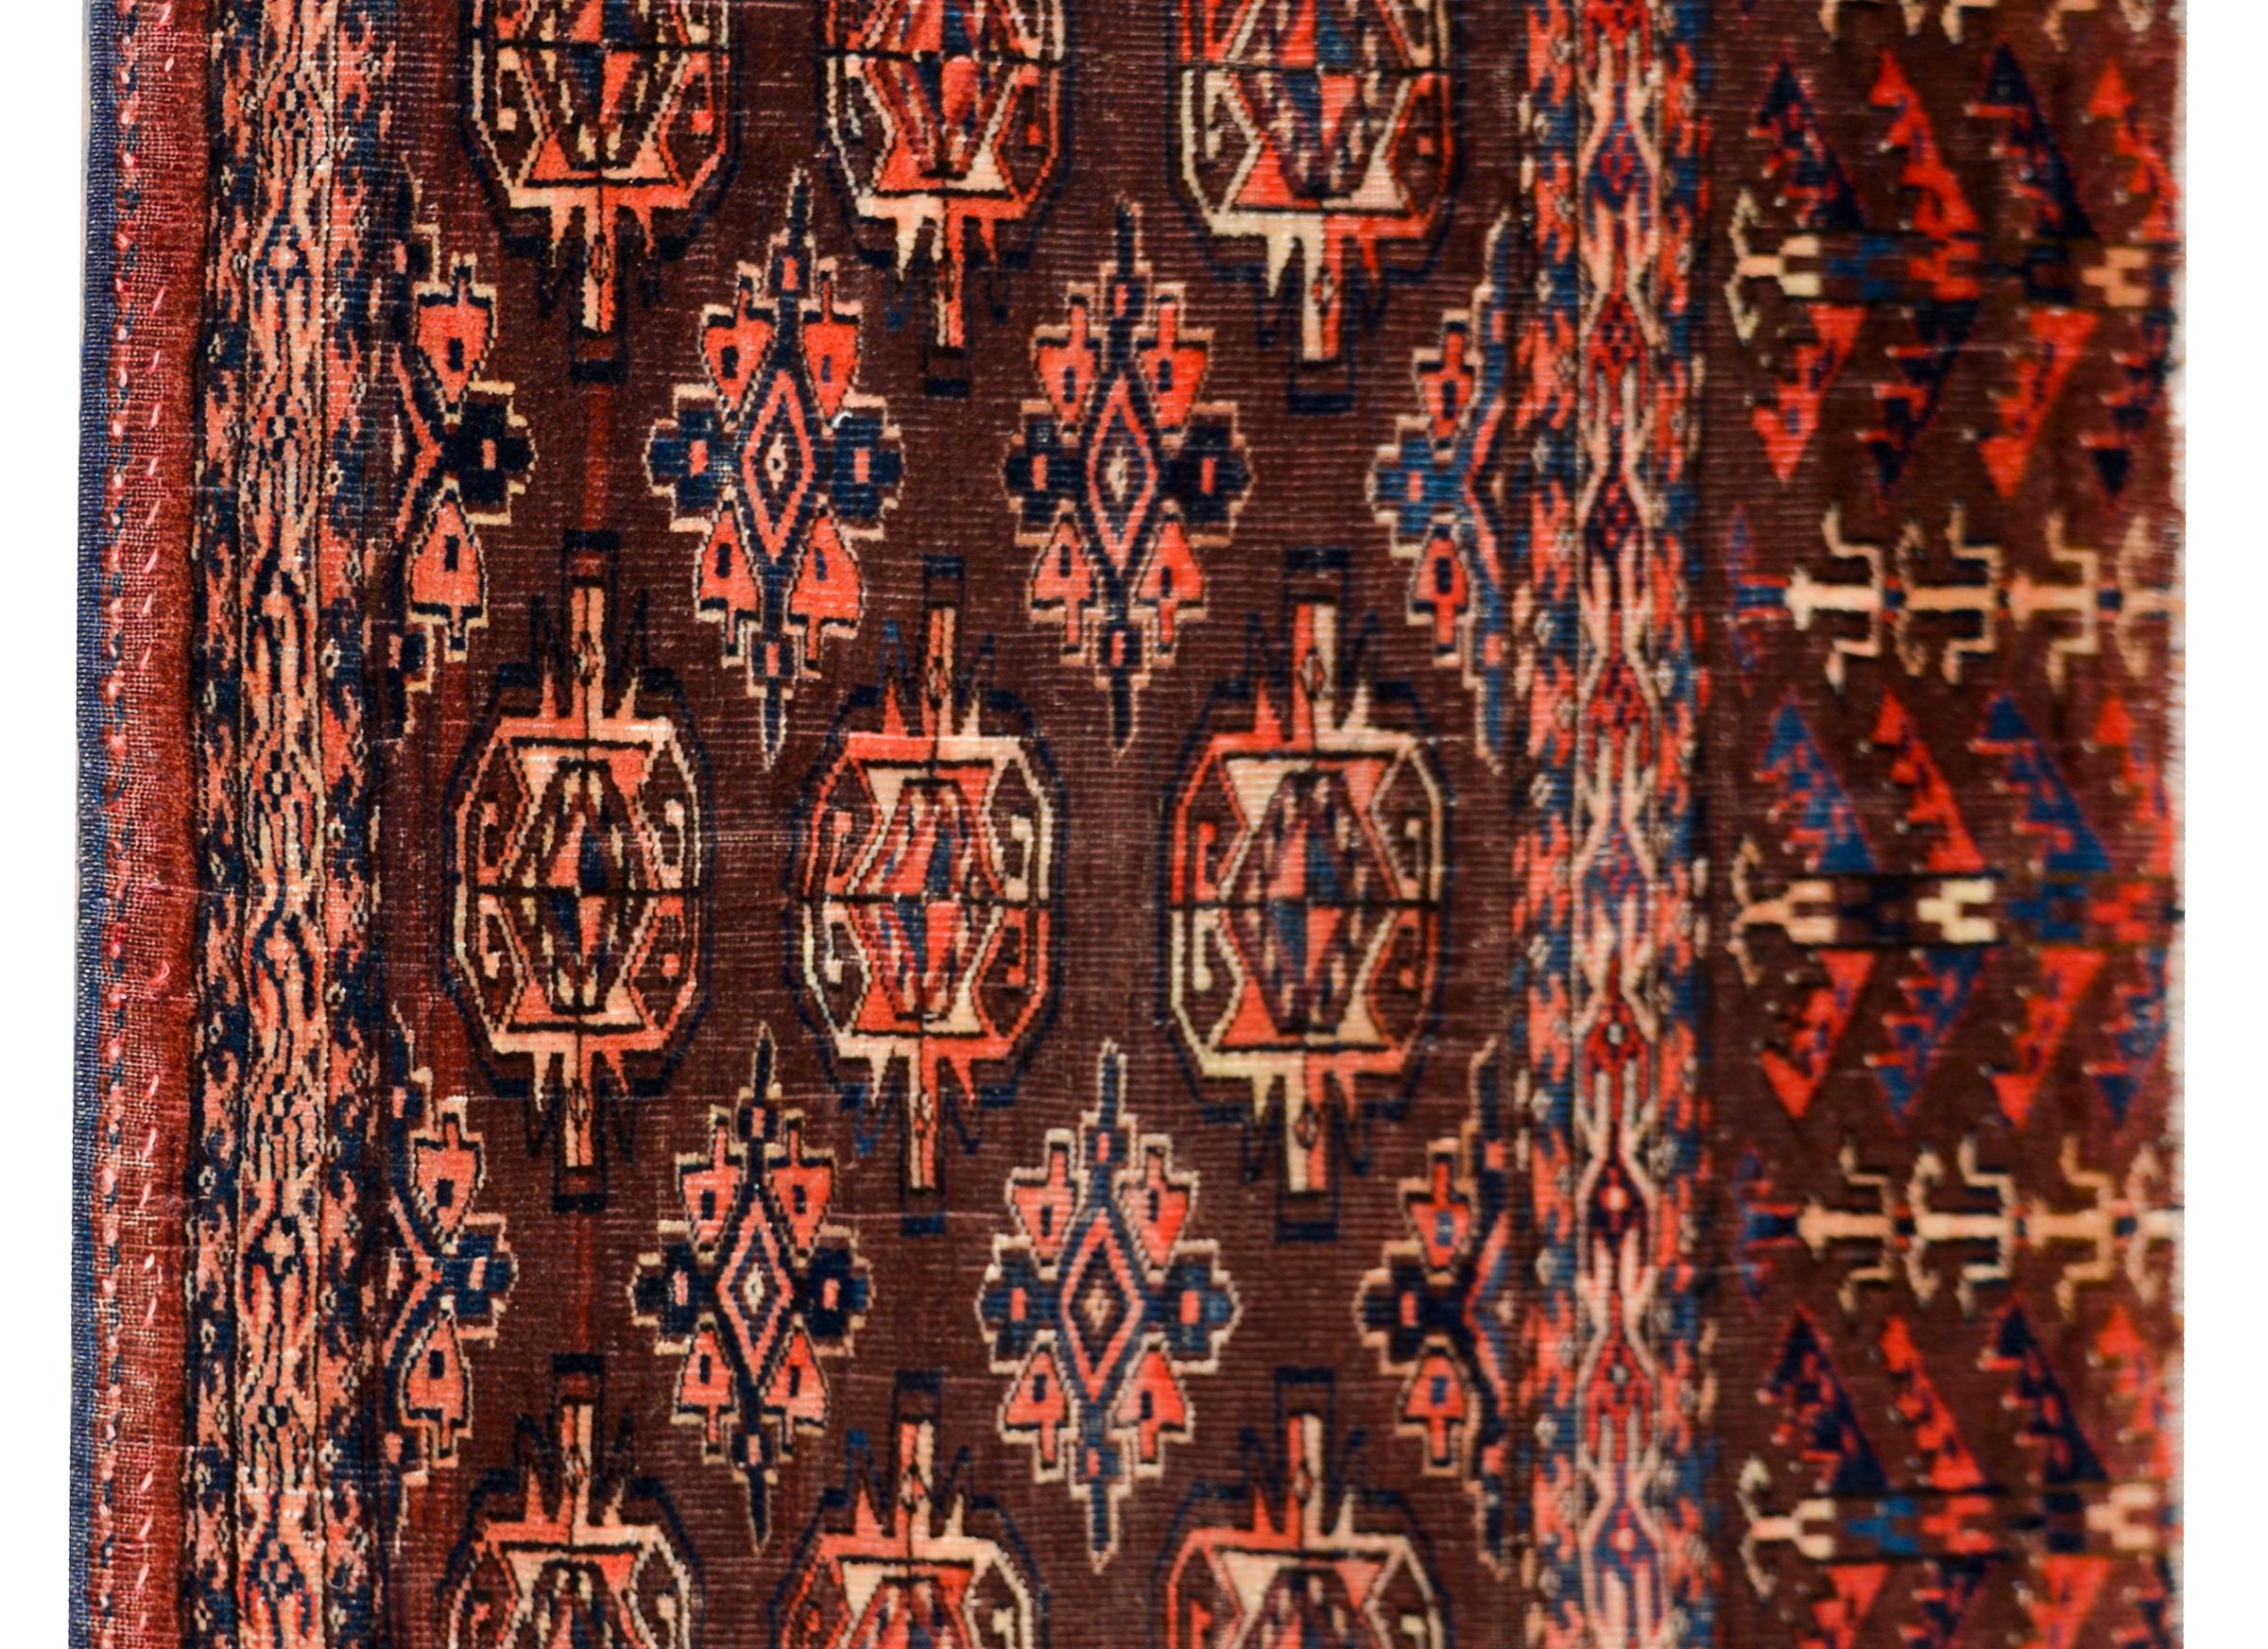 A wonderful early 20th century Persian Teke rug with an asymmetrical geometric pattern with several stylized flowers woven in crimson, indigo, and cream colored wool against a brown background, and surrounded by a border with even more geometric